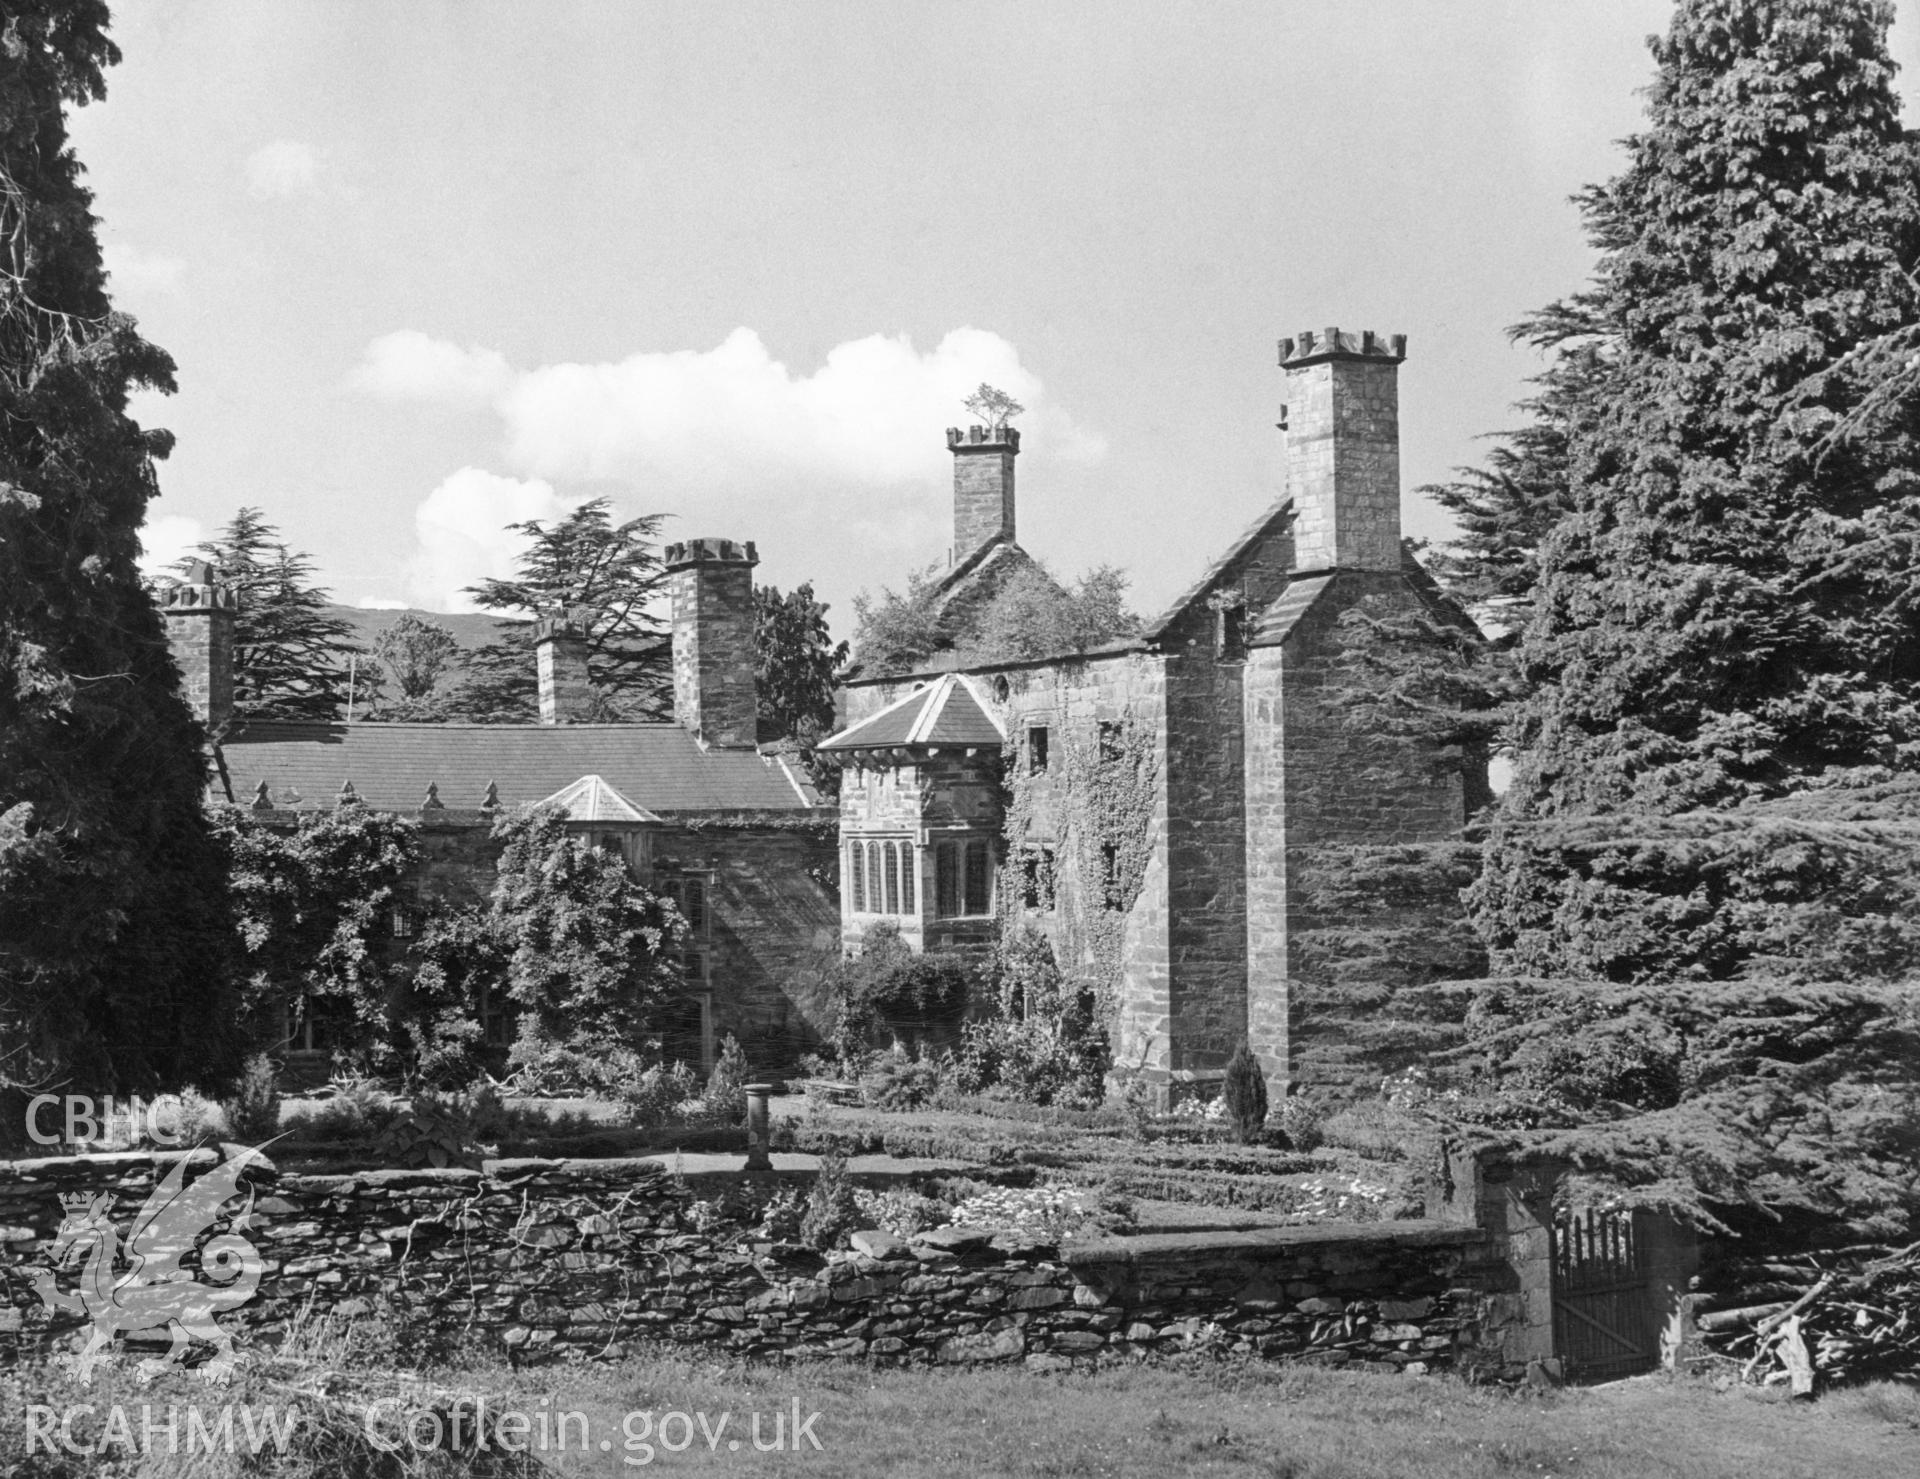 1 b/w print showing view of Gwydir castle, collated by the former Central Office of Information.